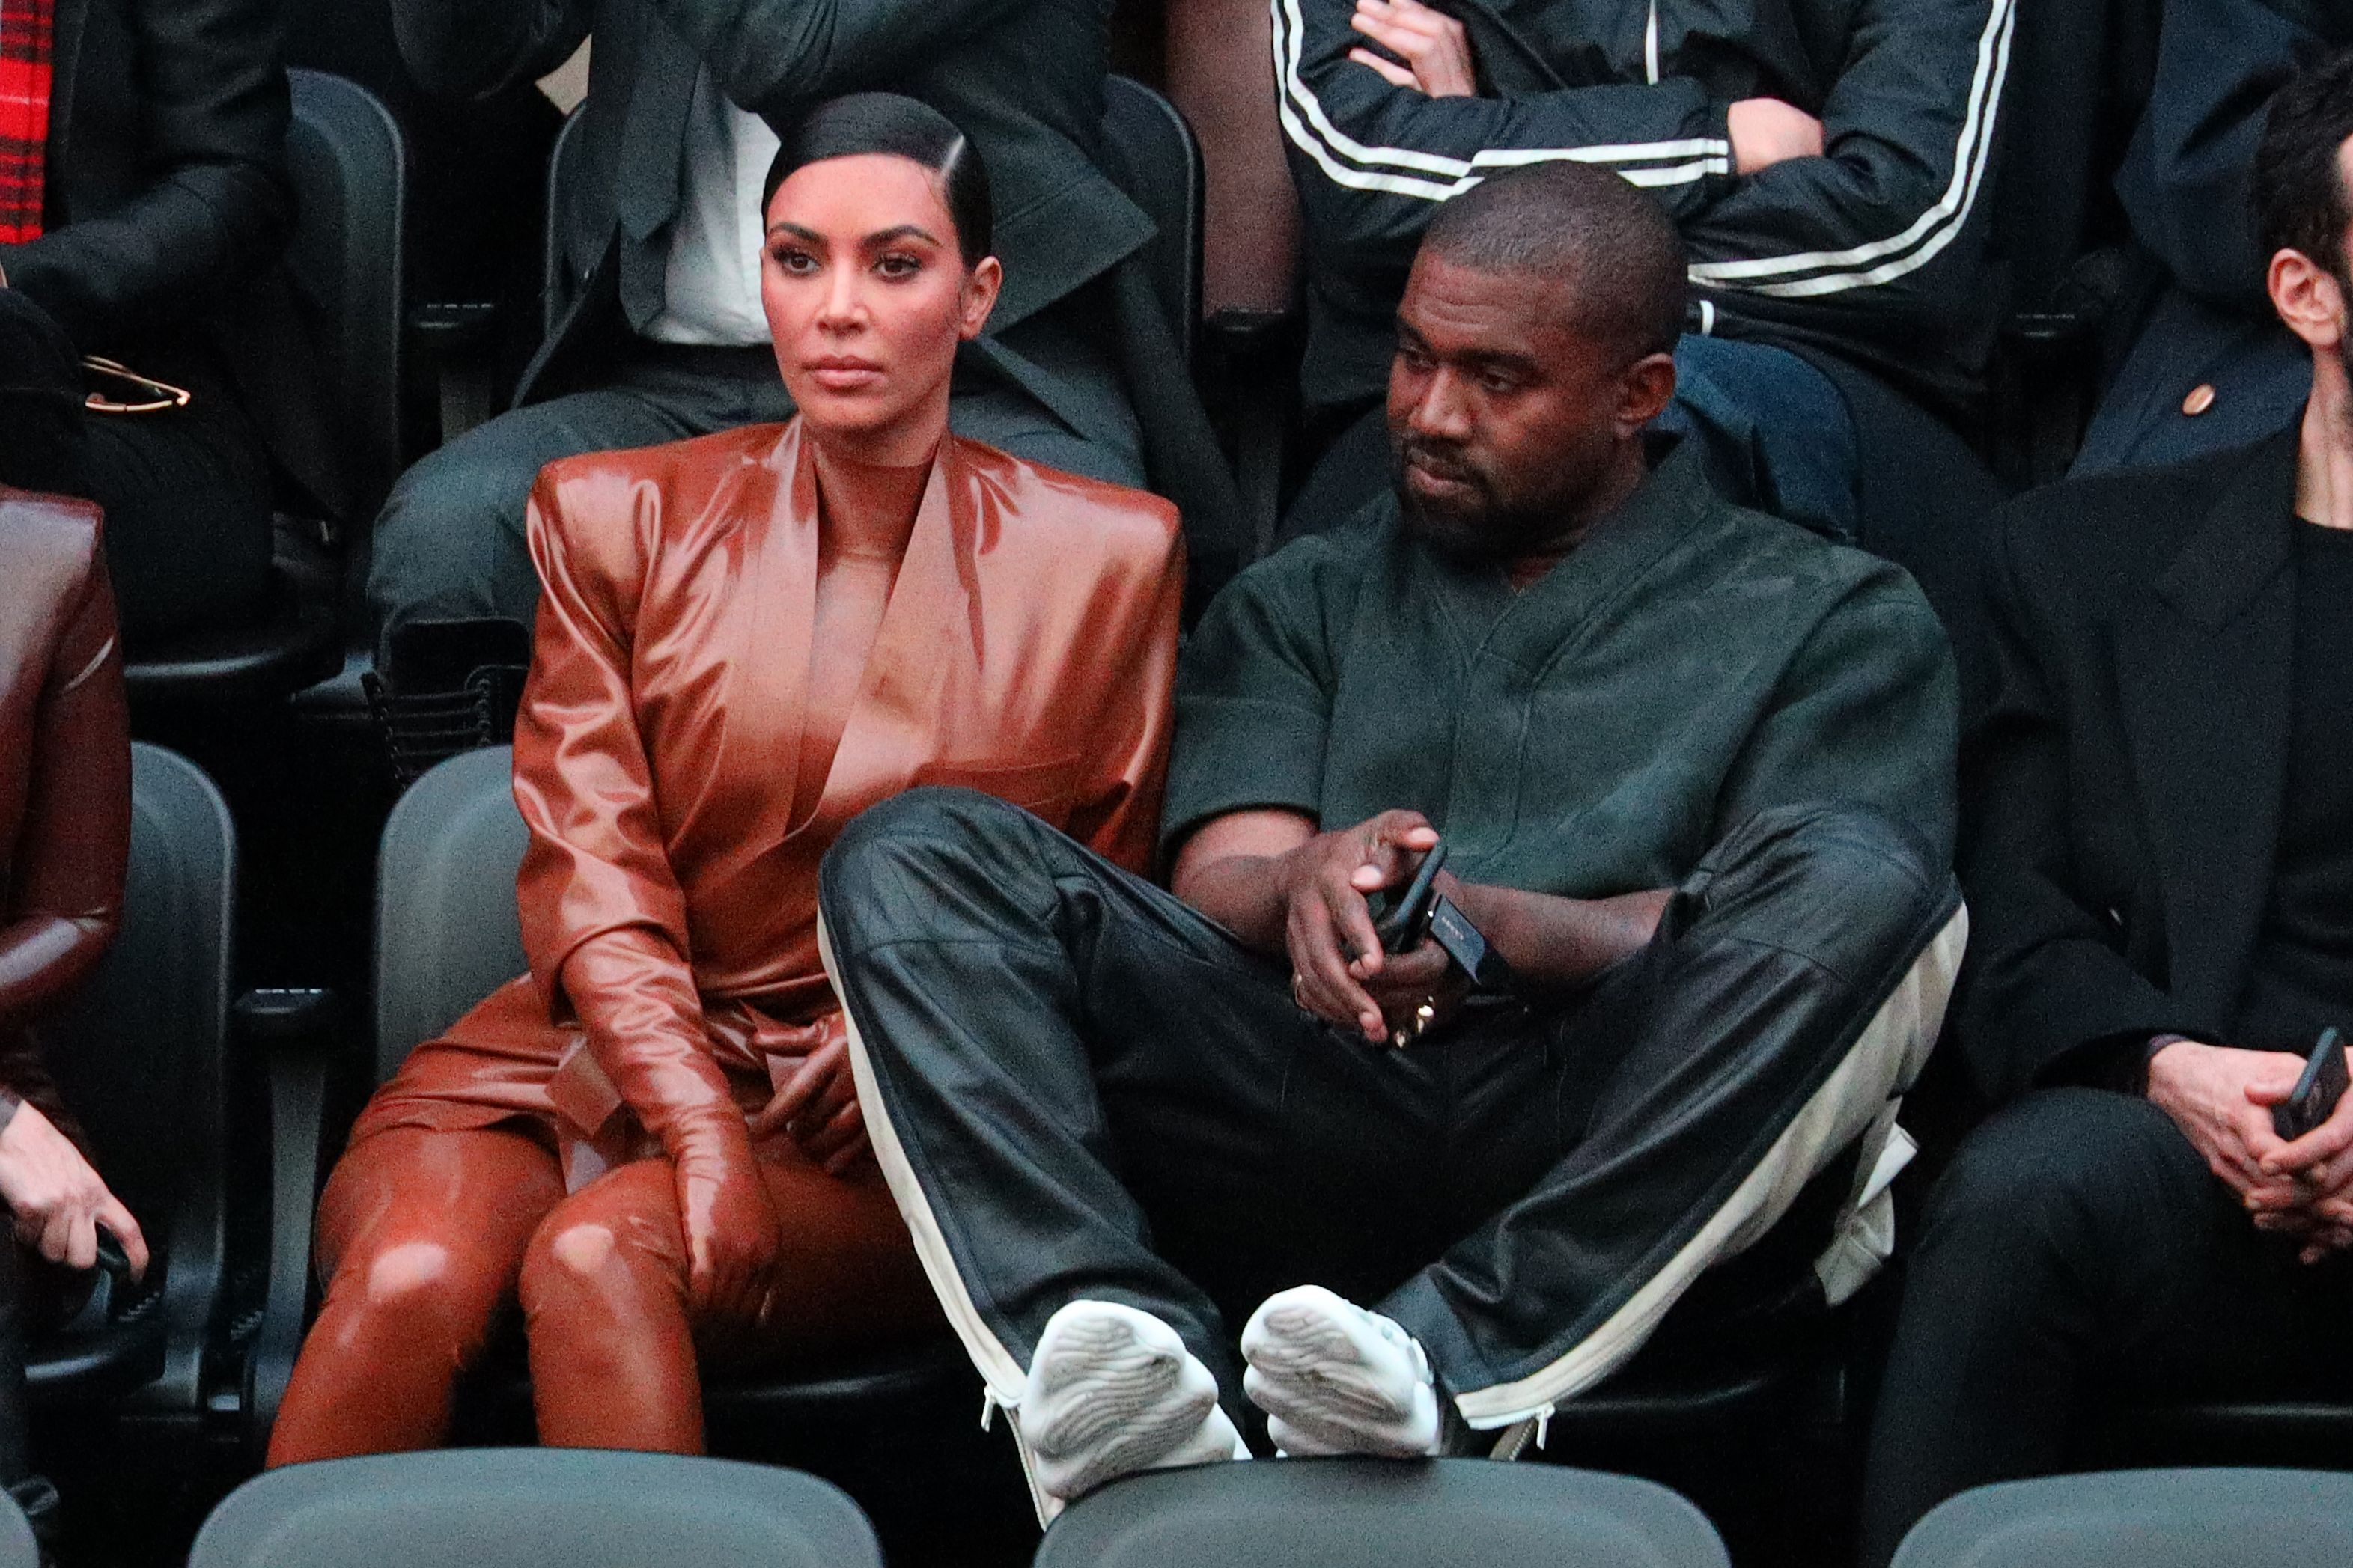 Kanye's Nude Girlfriend Appears With Him In Louis Vuitton Ad (NSFW PHOTOS)